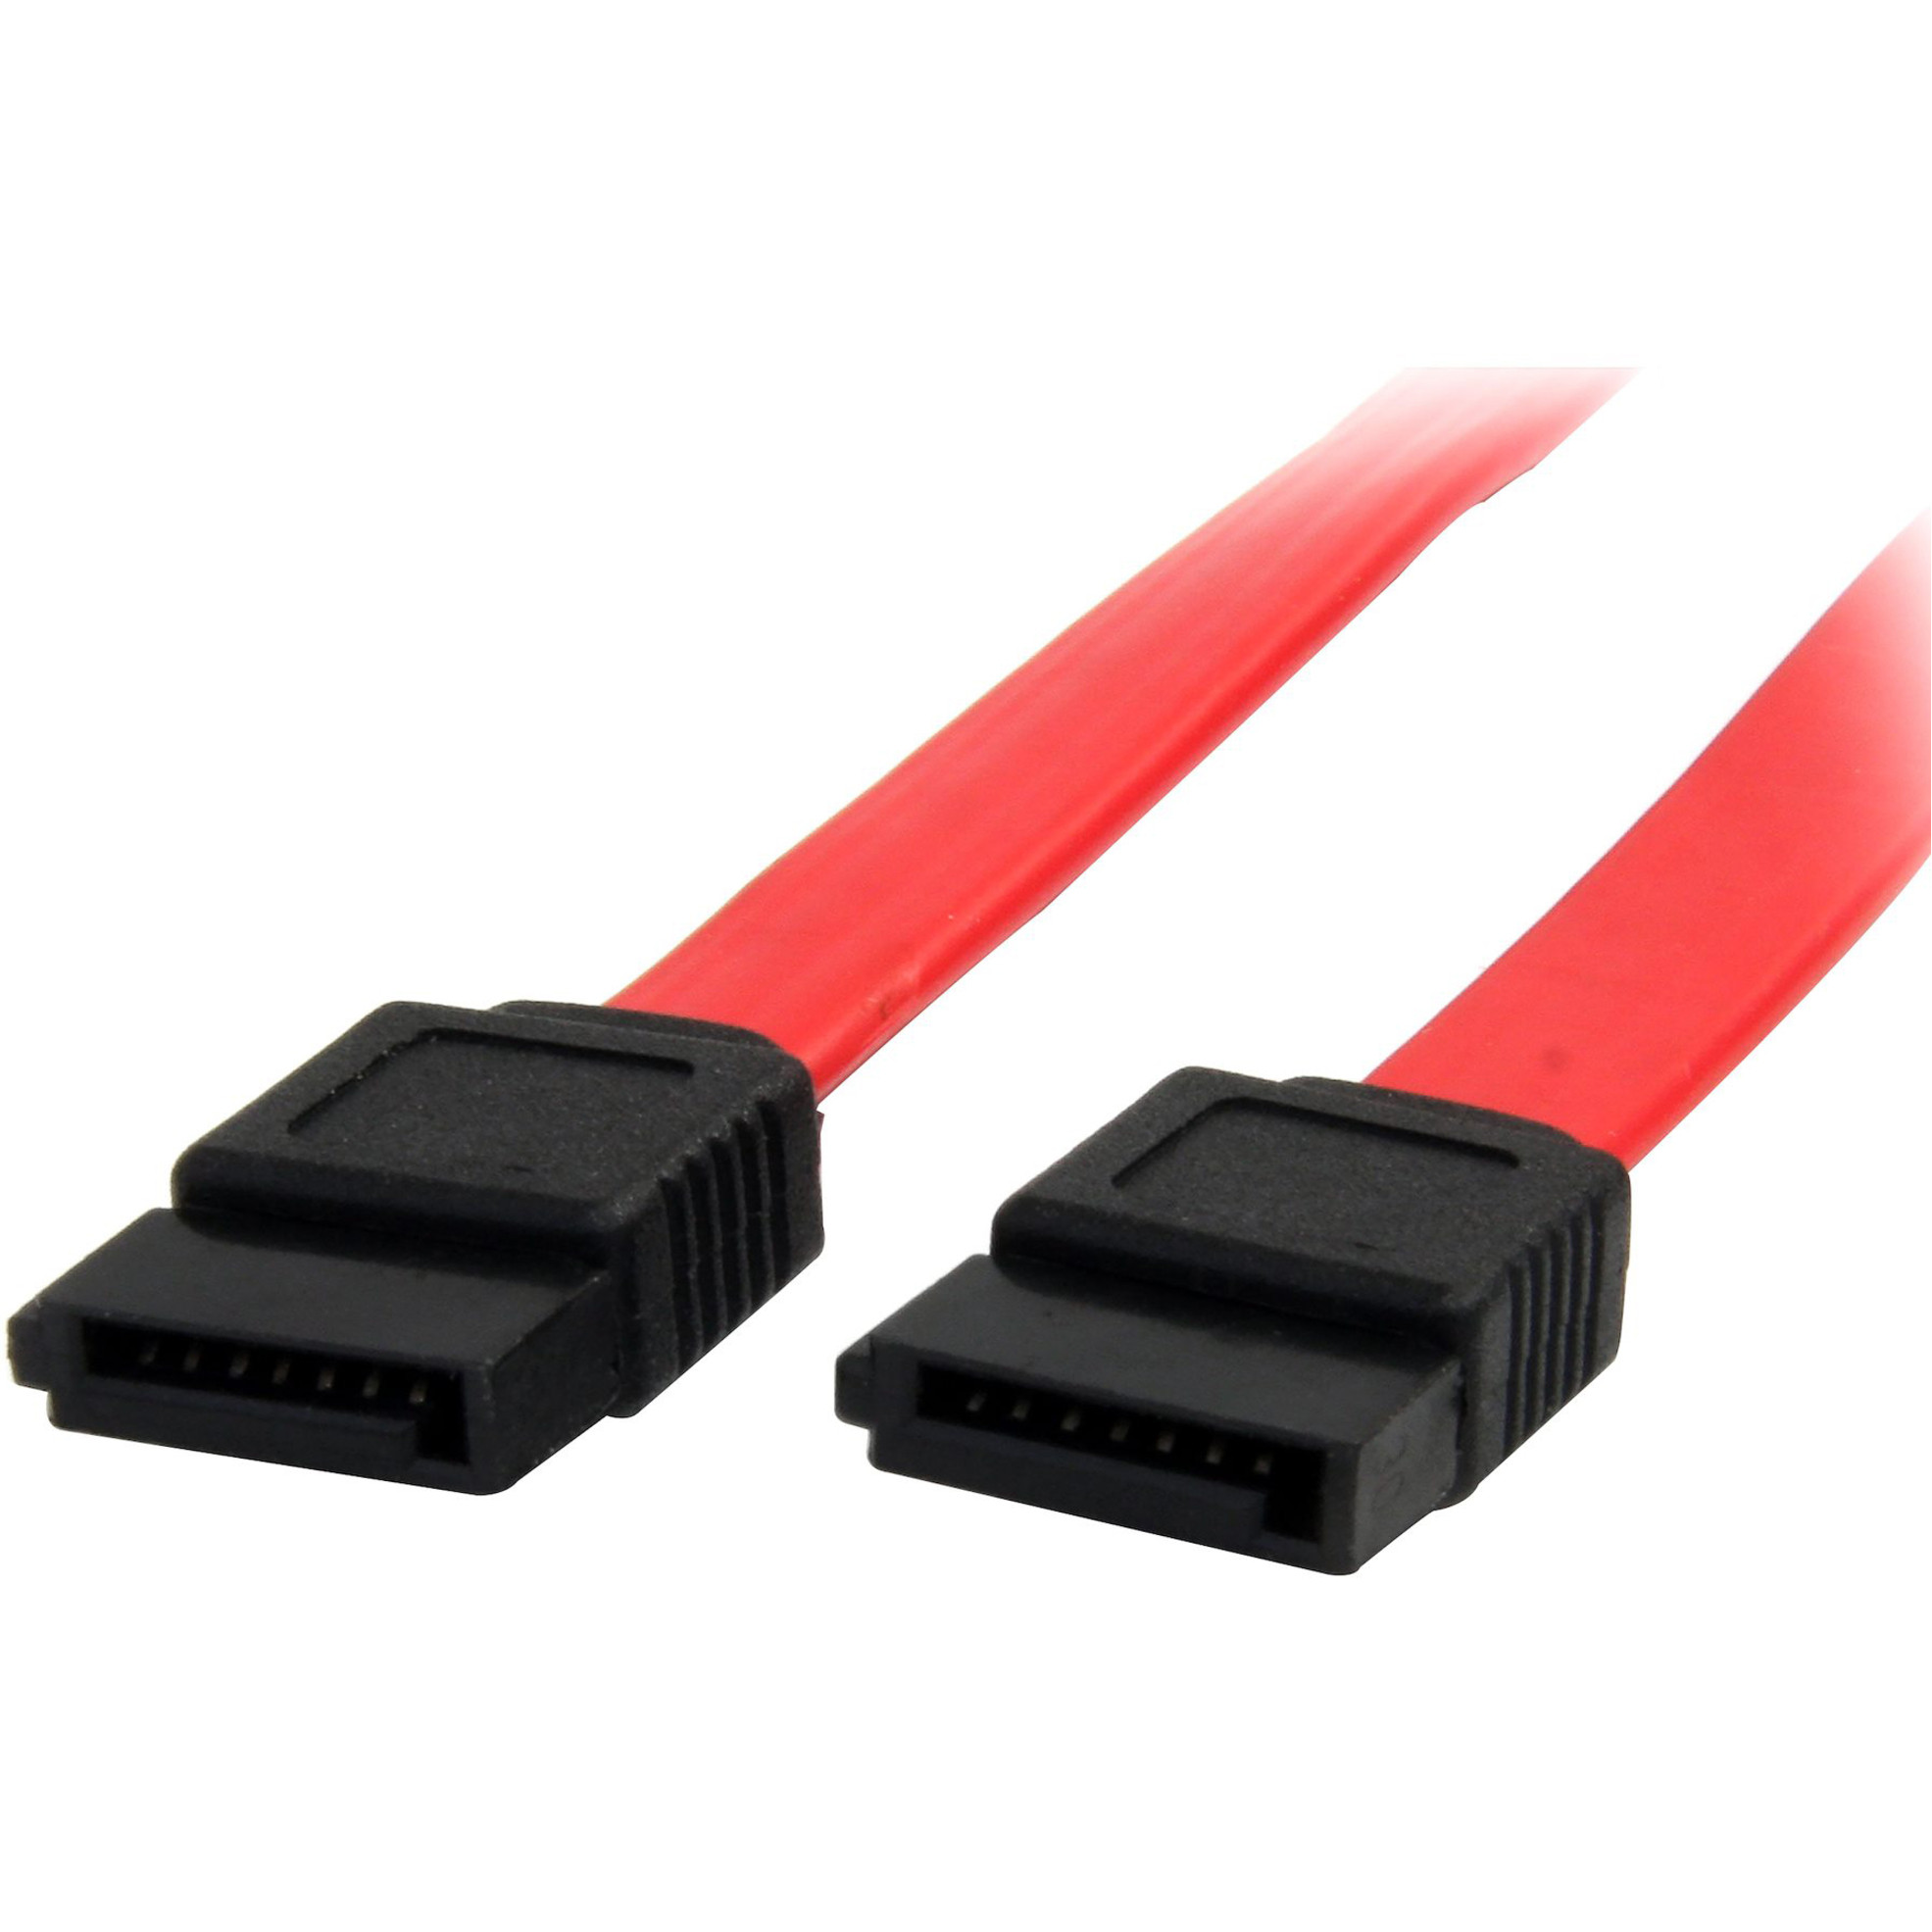 Startech .com .com Serial ATA CableThis high quality SATA cable is designed for connecting SATA drives even in tight spaces.18in sat… SATA18